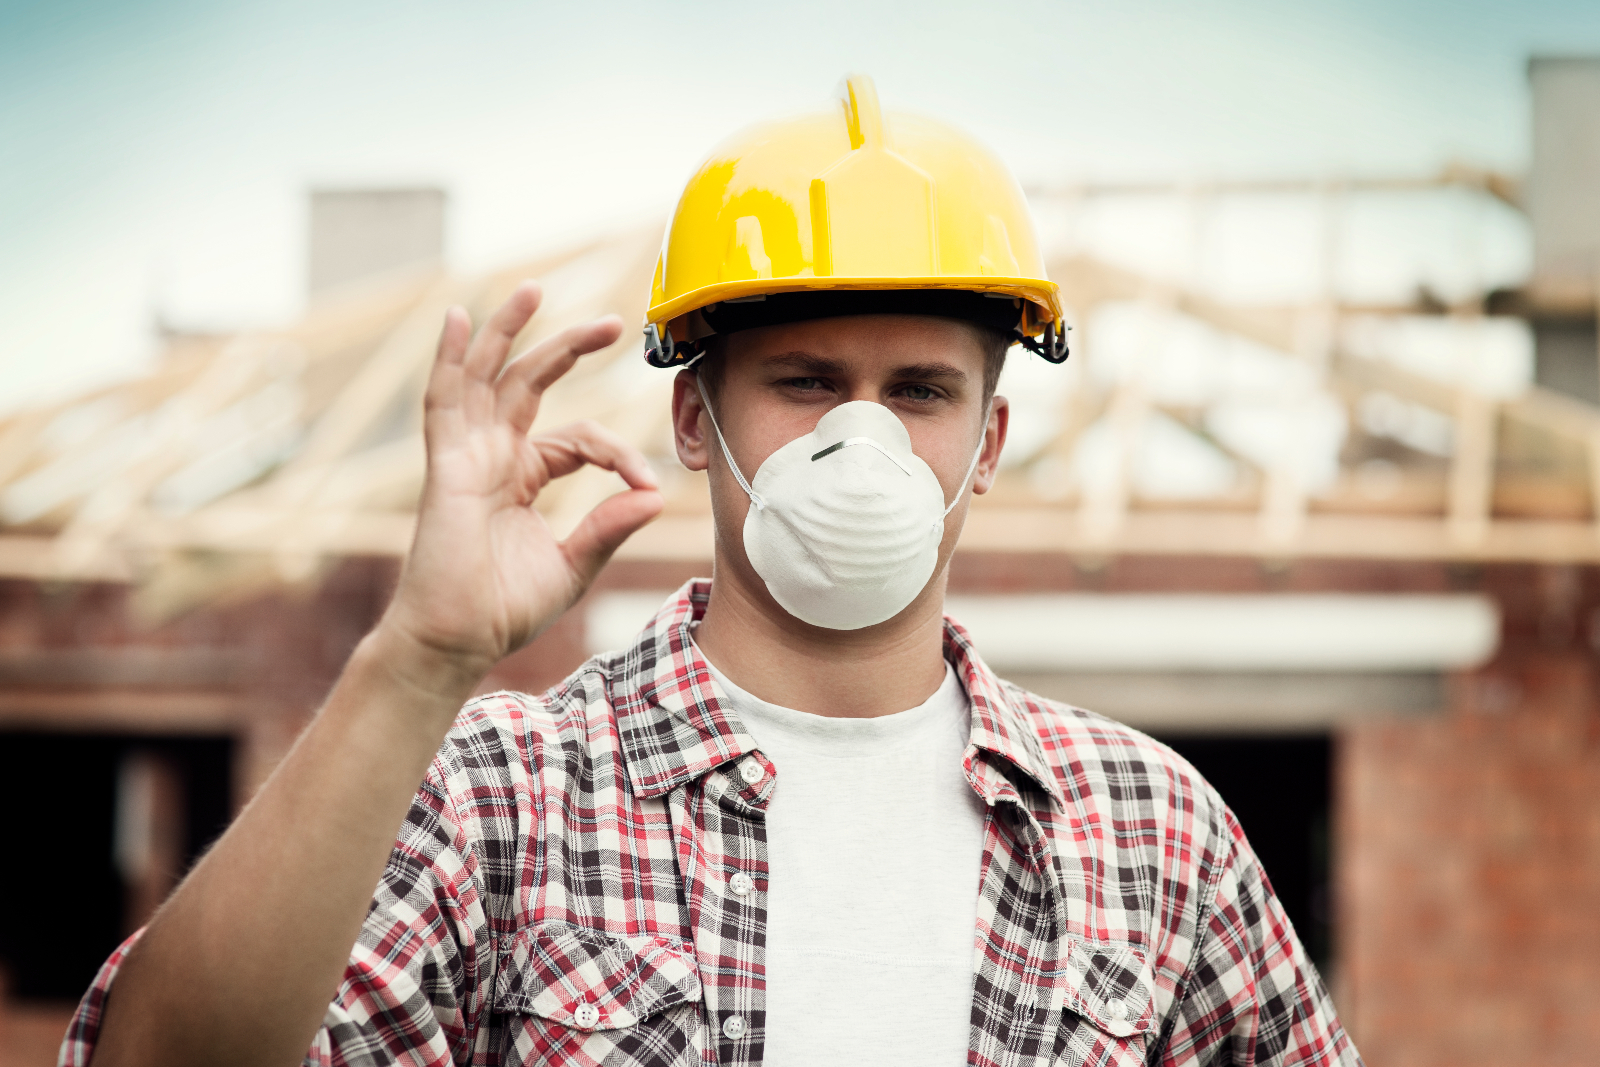 Construction site worker wearing a face mask and making an OK sign with his hands.